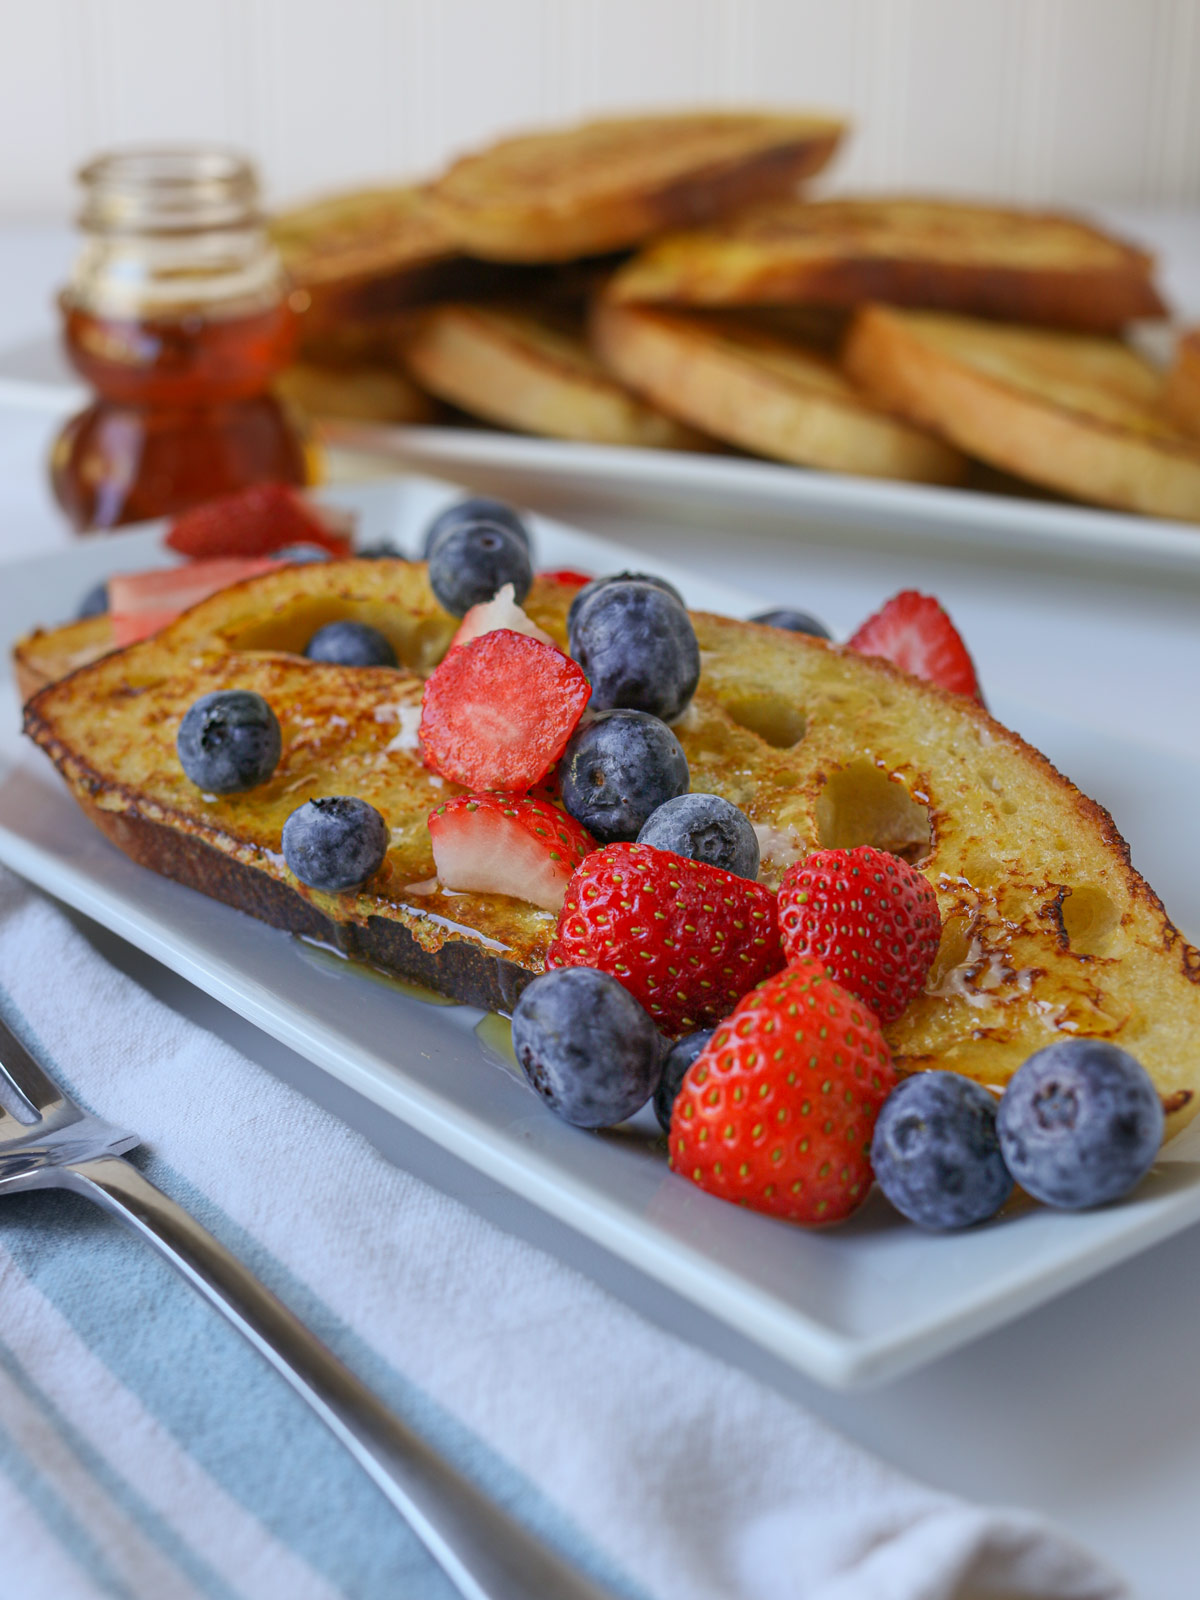 plate of sourdough french toast topped with berries near a bear jar of honey and a platter of more french toast.